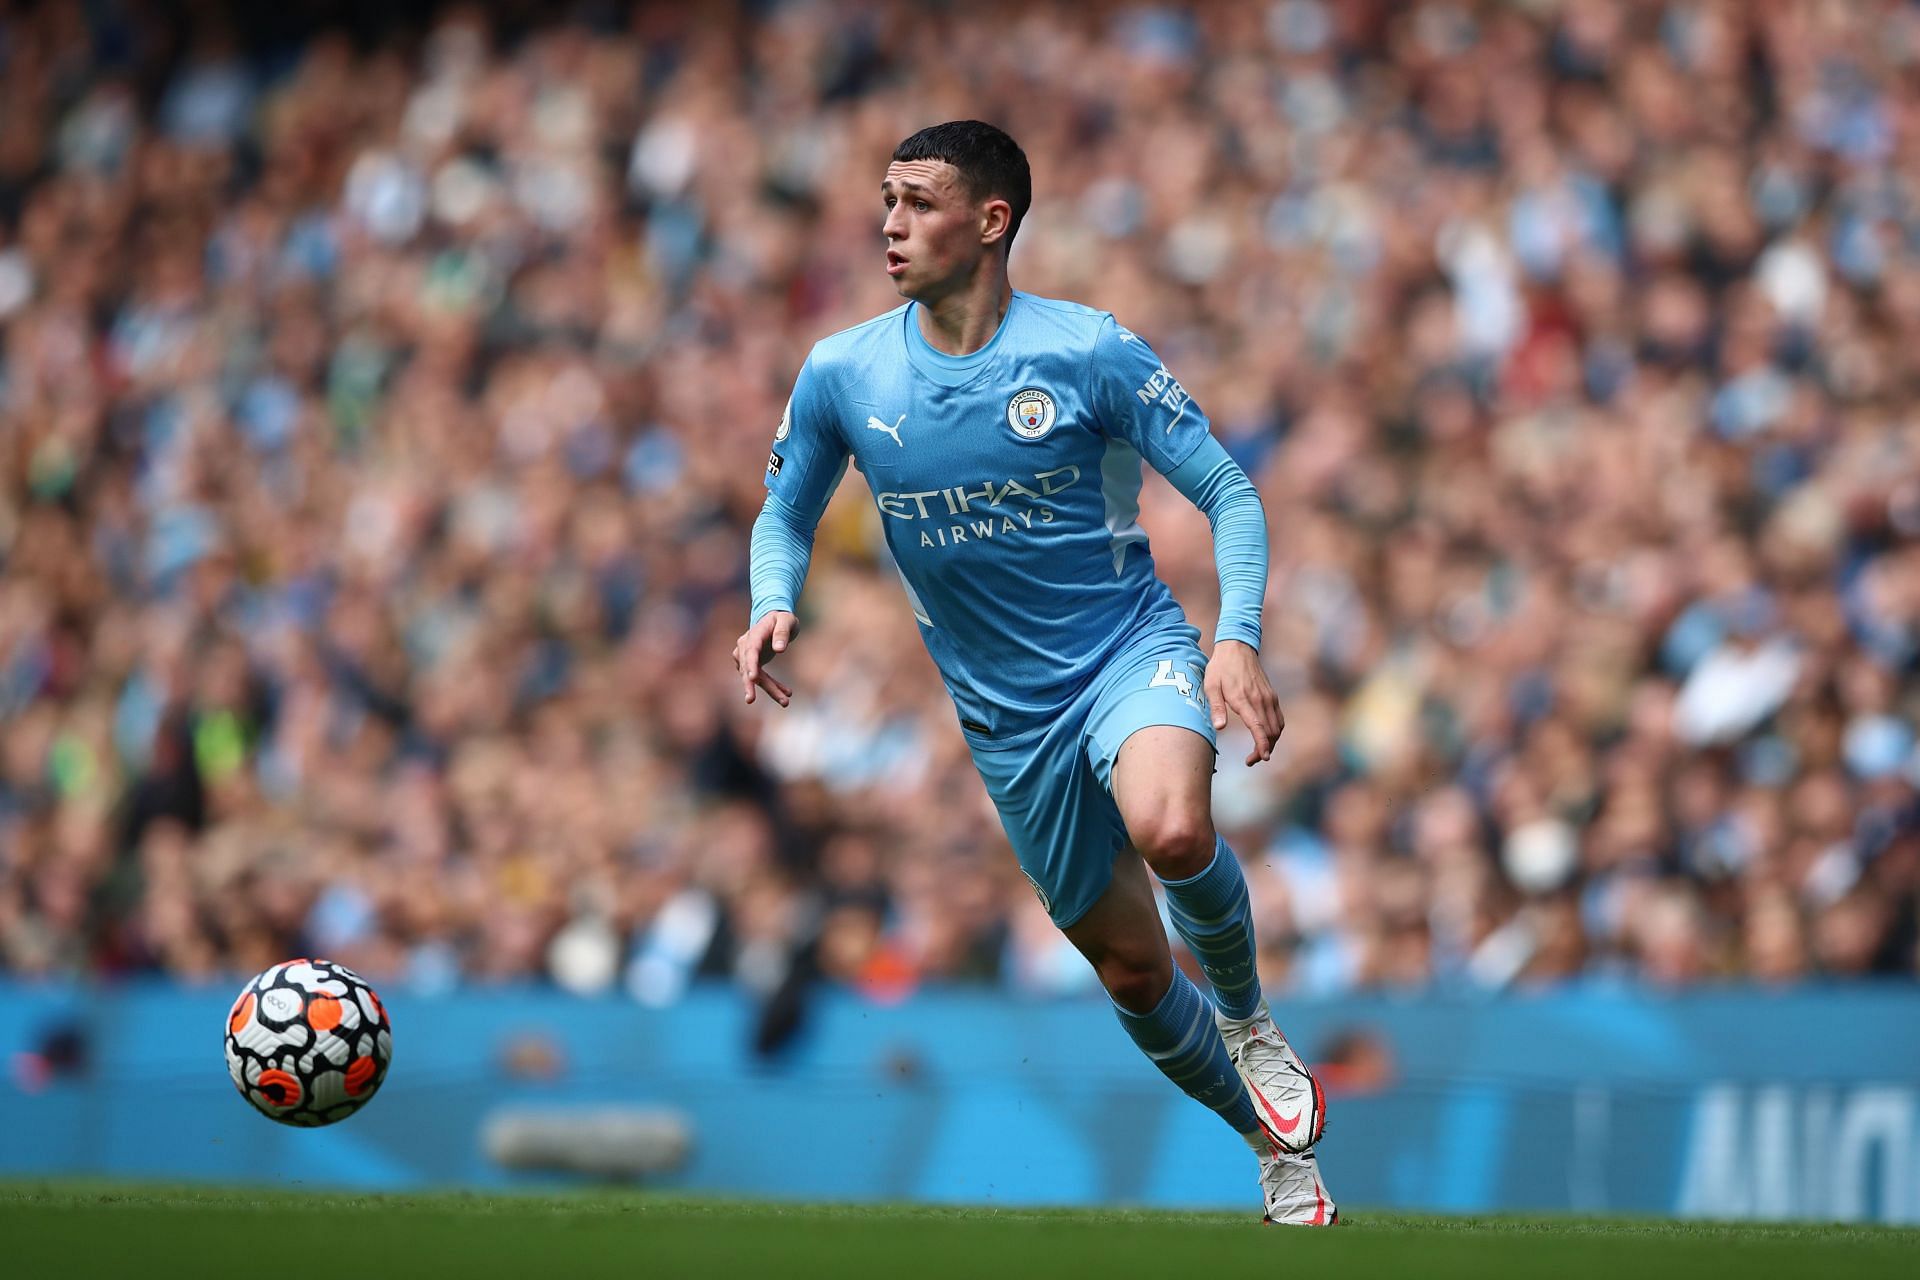 Phil Foden in action for Manchester City against Burnley.